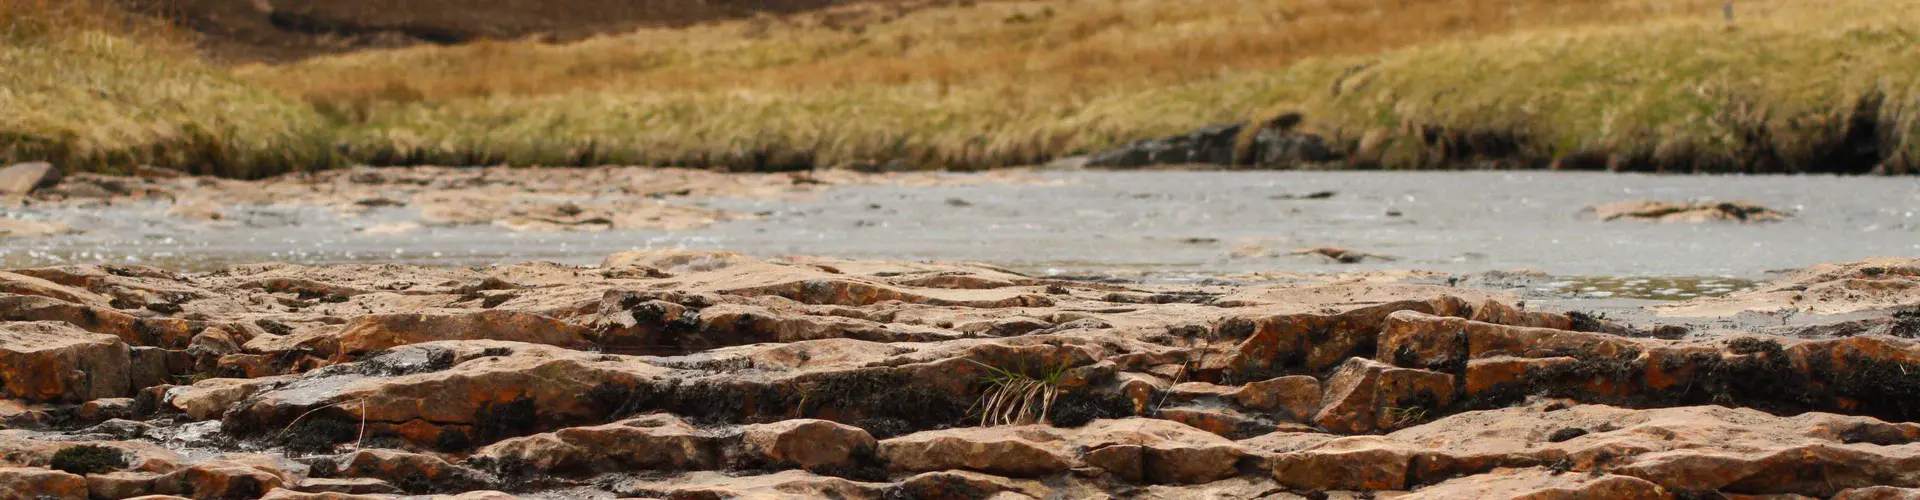 Dry river bed in Northern England (Credit: Catherine Moody, distributed via imaggeo.egu.eu)